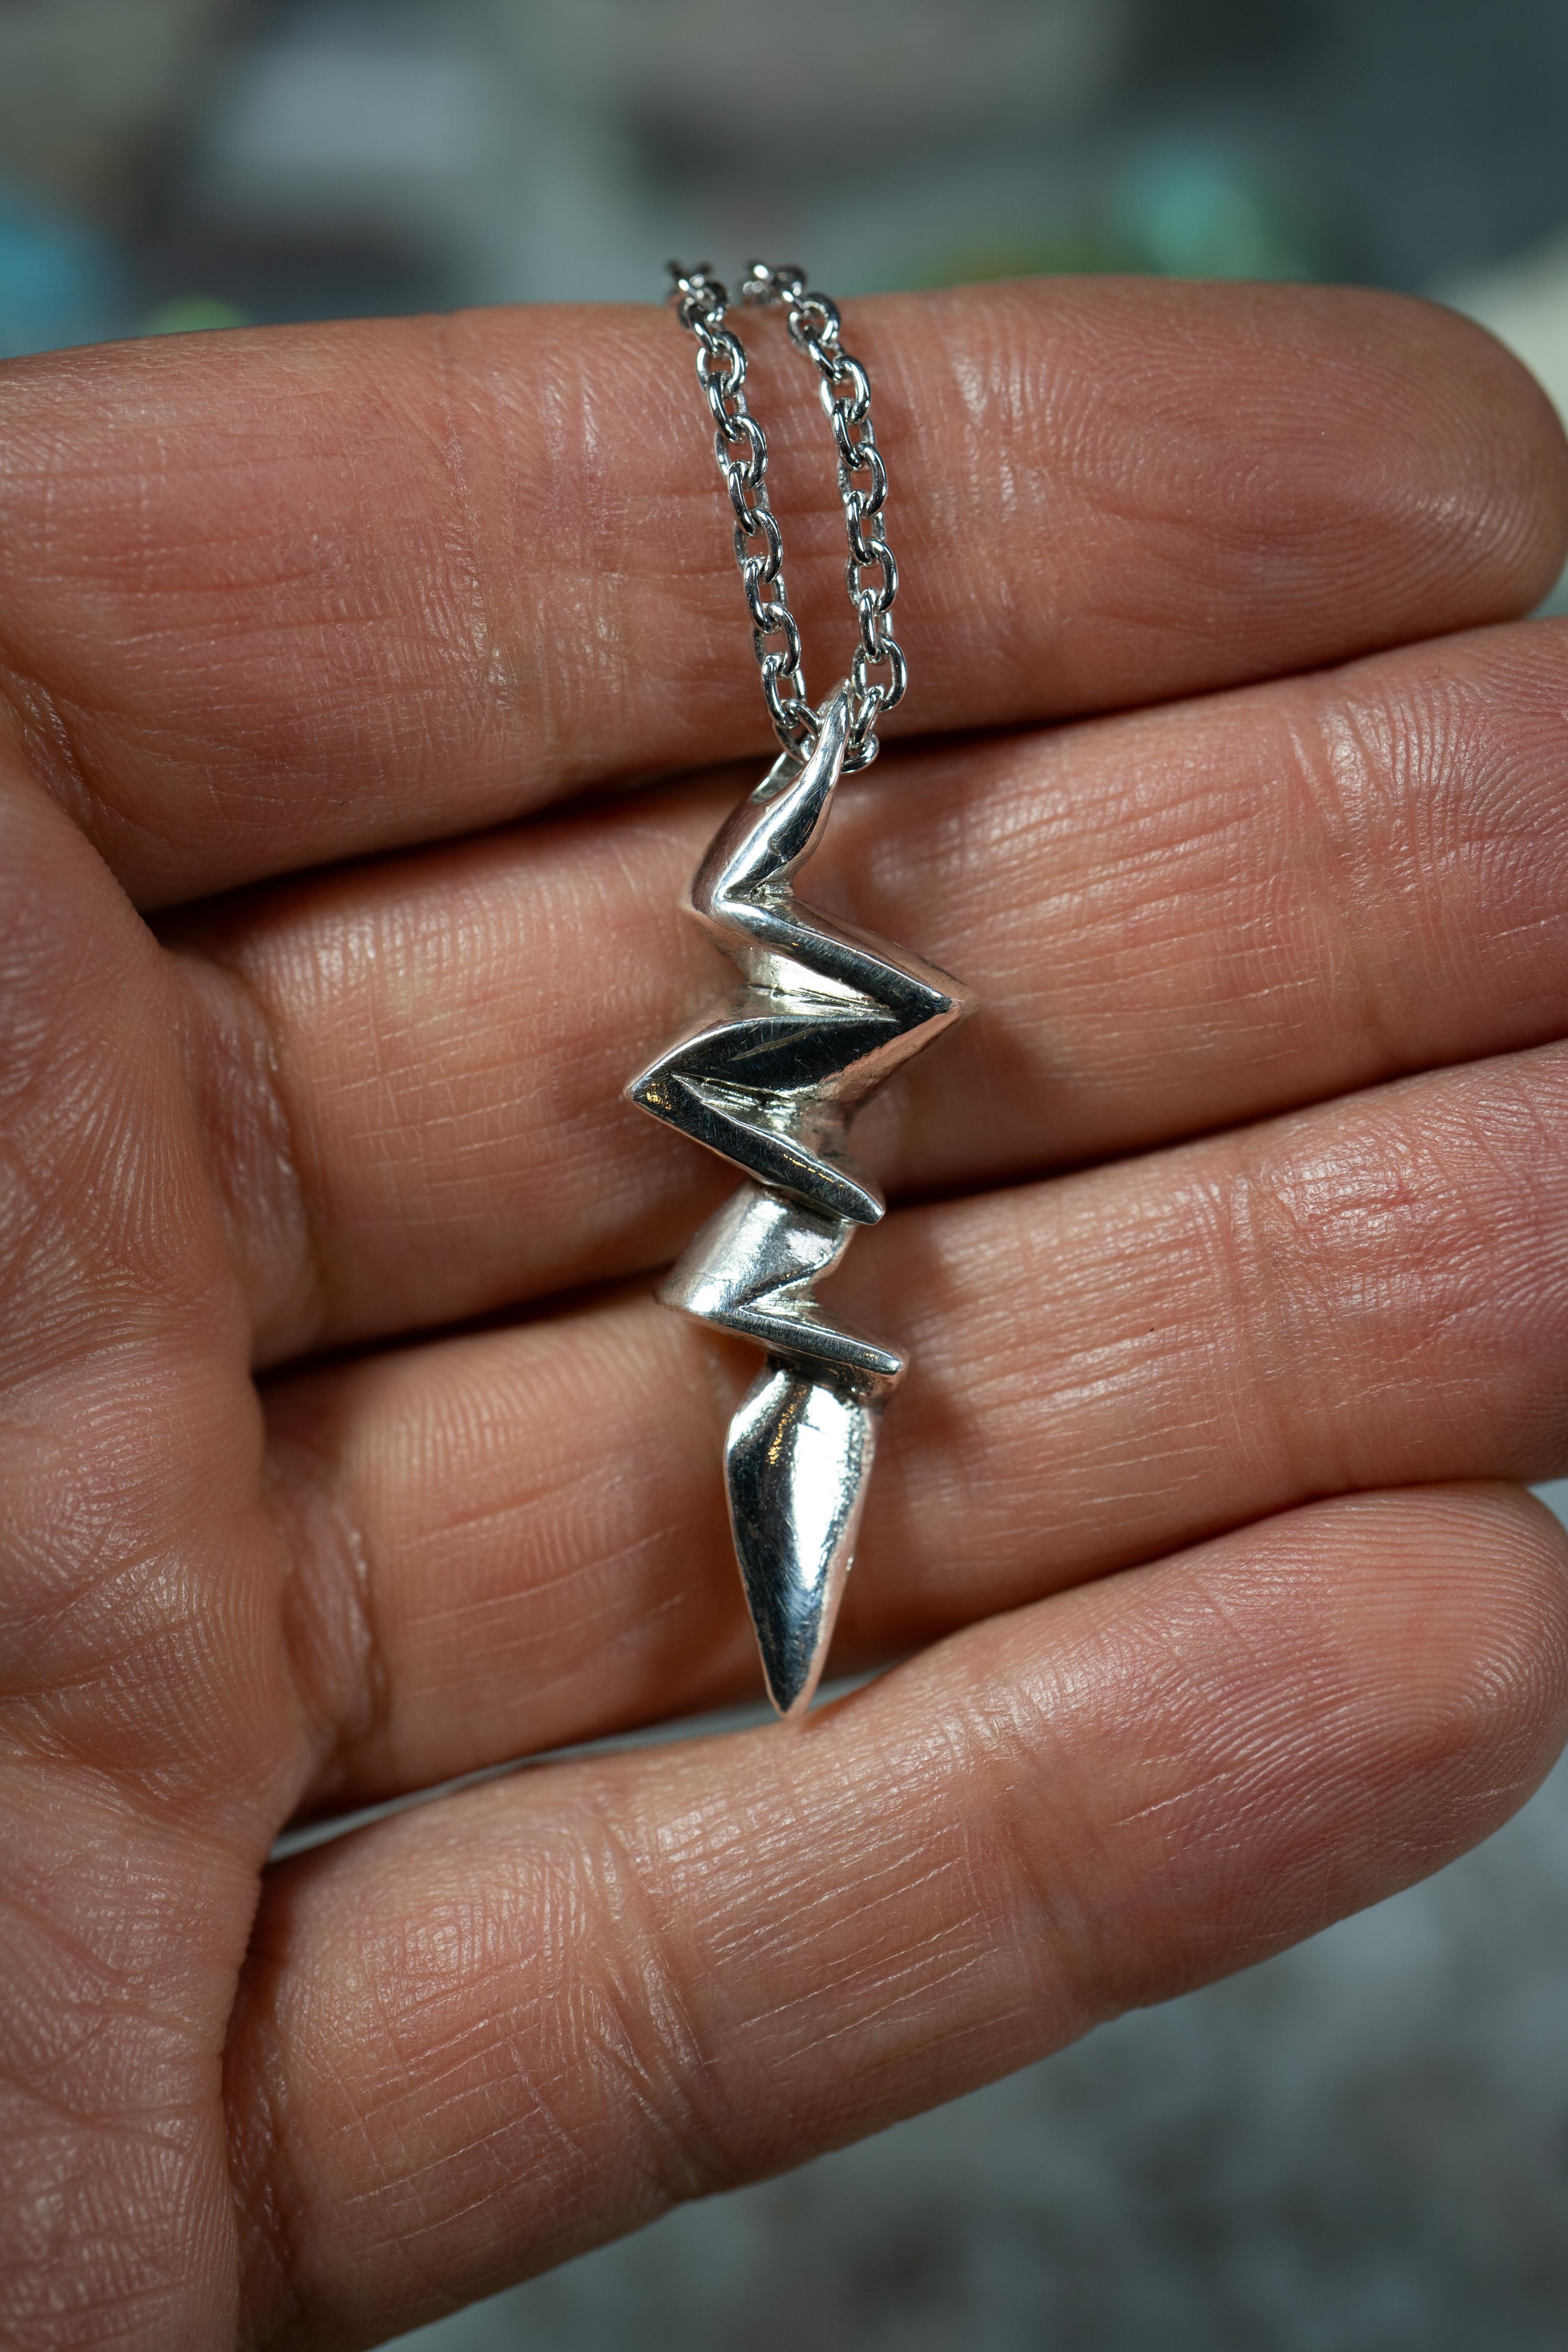 Lightning Bolt pendant by Ken Fury is hand-carved and cast. This pendant symbolizes nature's raw power, beauty, and transformative and illuminating qualities.

Available in 14K Solid White or Yellow Gold. Send a message to specify which one you